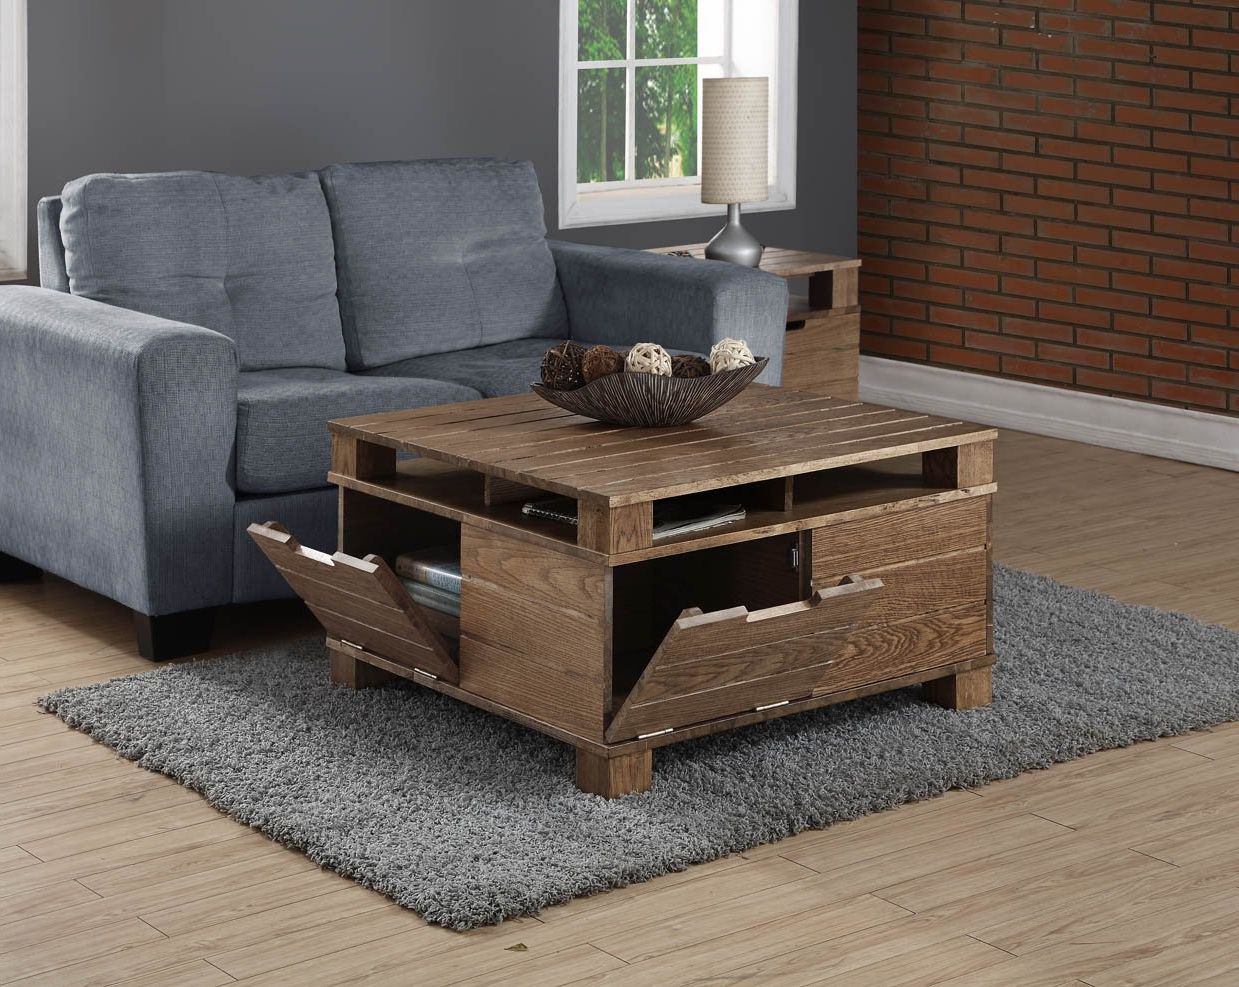 Newest Jual Rustic Oak Solid Wood Coffee Table At Barnitts Online Inside Wood Coffee Tables (View 5 of 20)